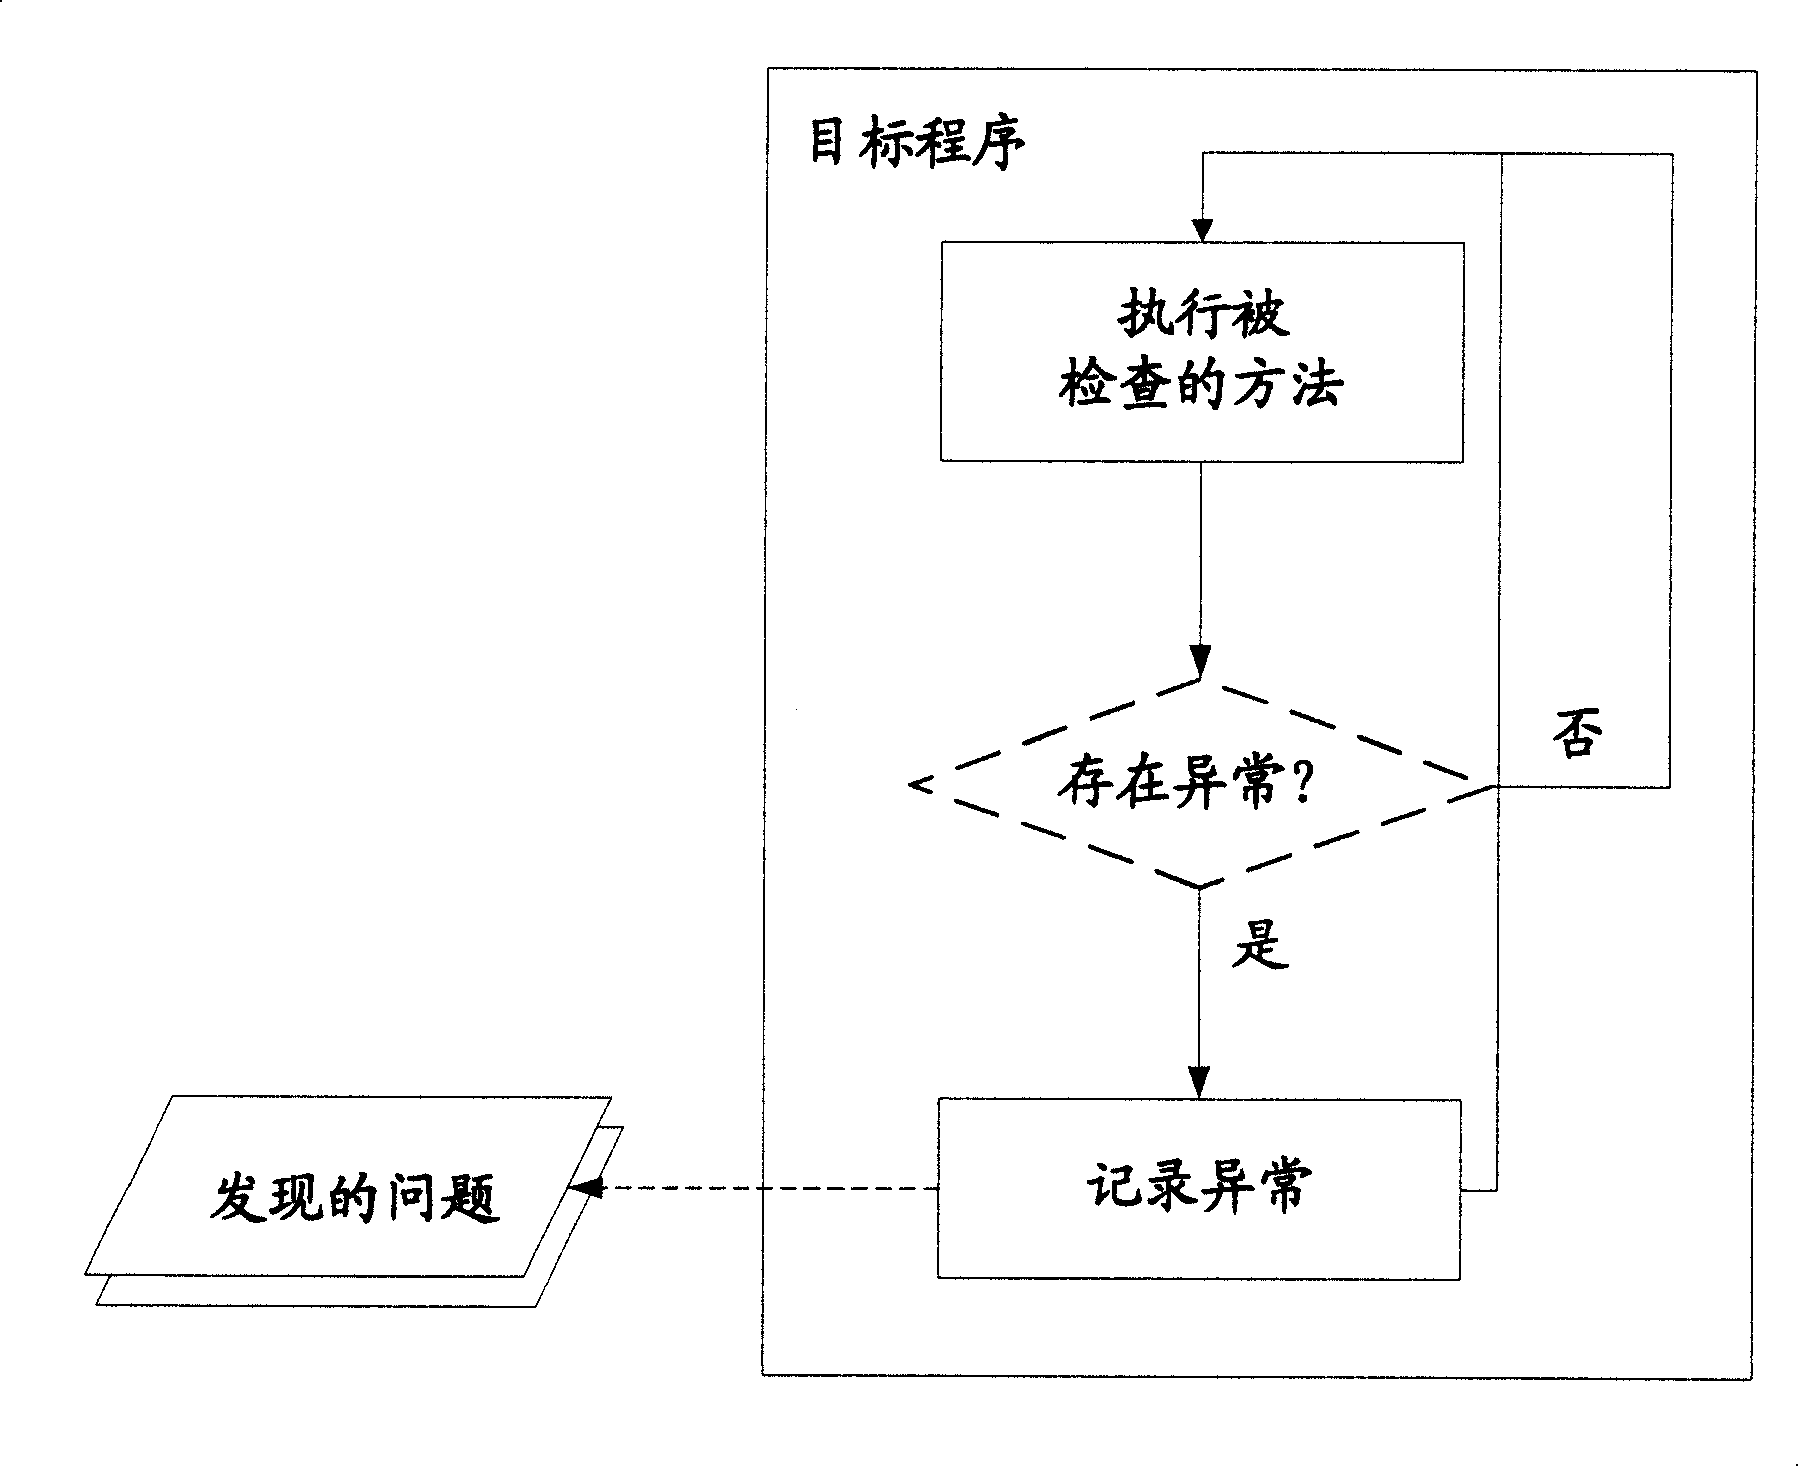 Method and system for automatically generating unit test case of reproduced operation problem